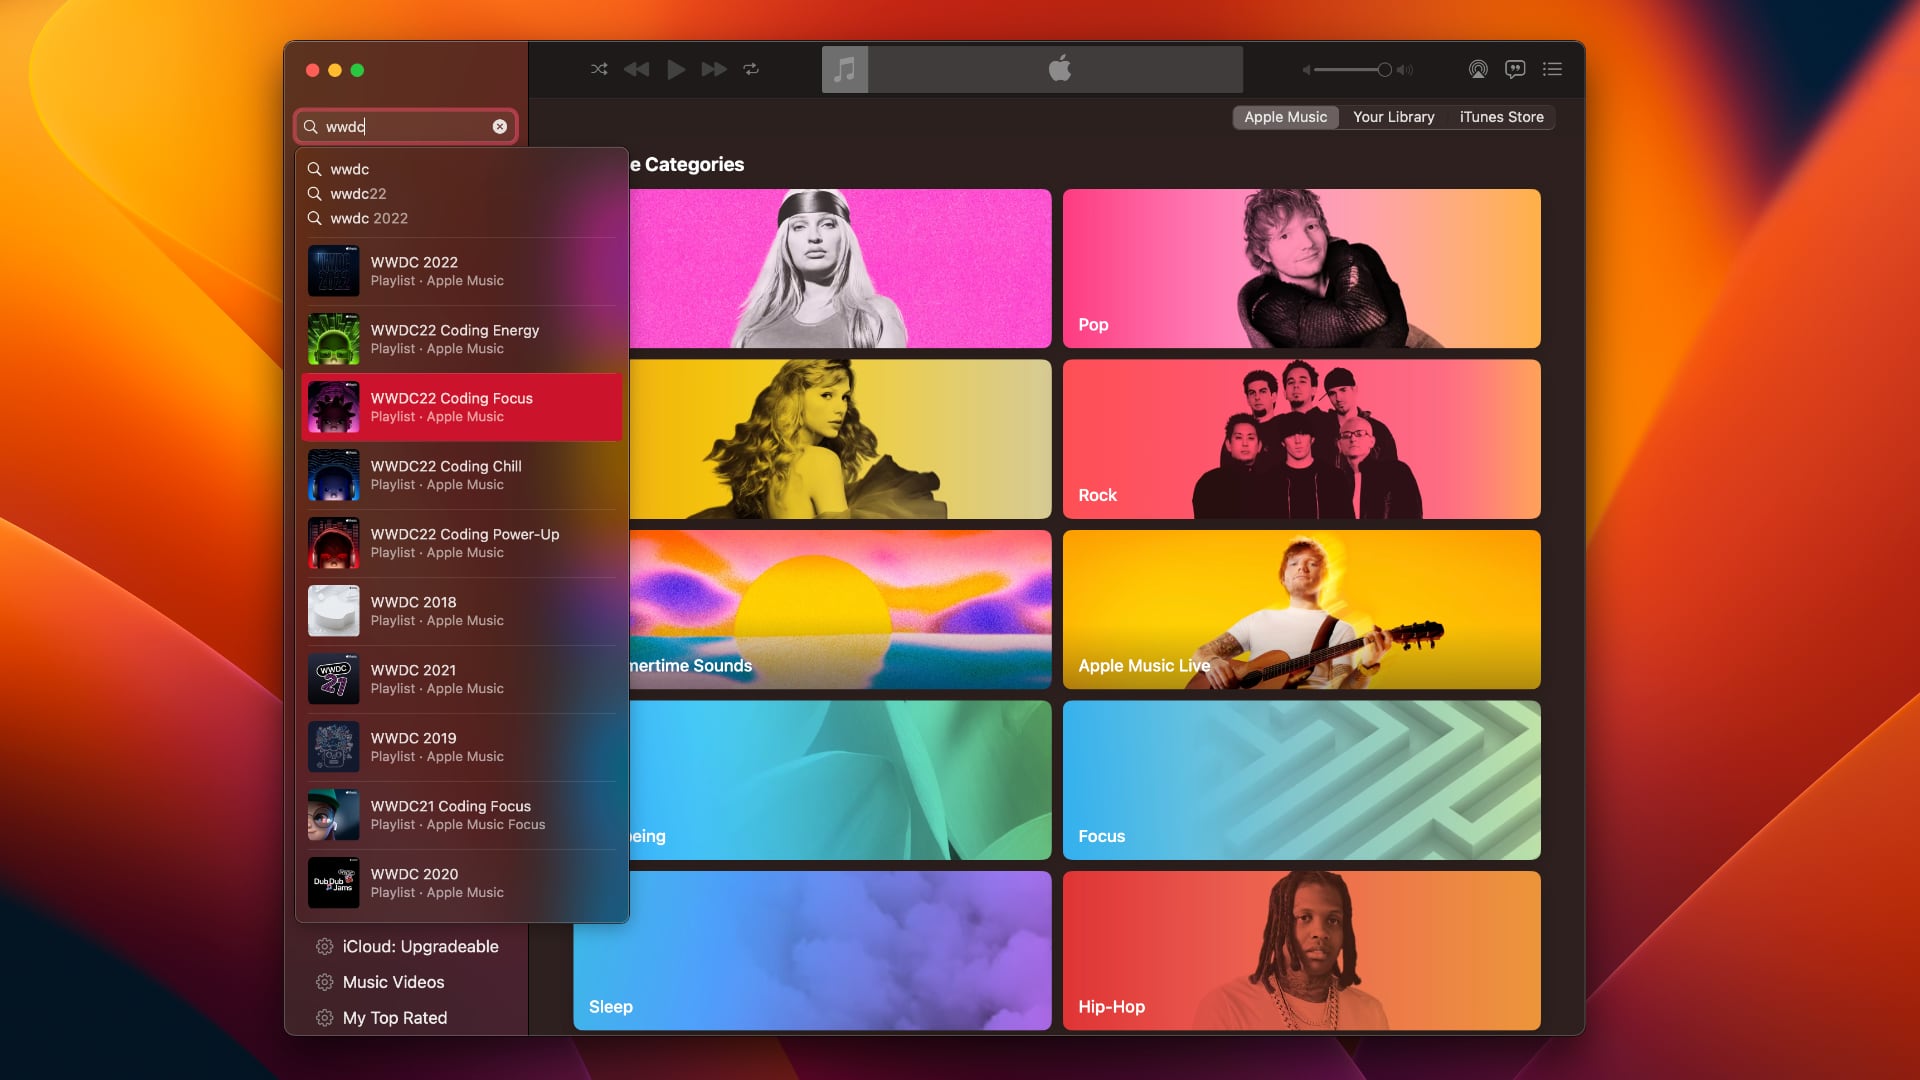 Showcasing WWDC playlists in Apple's Music app for macOS